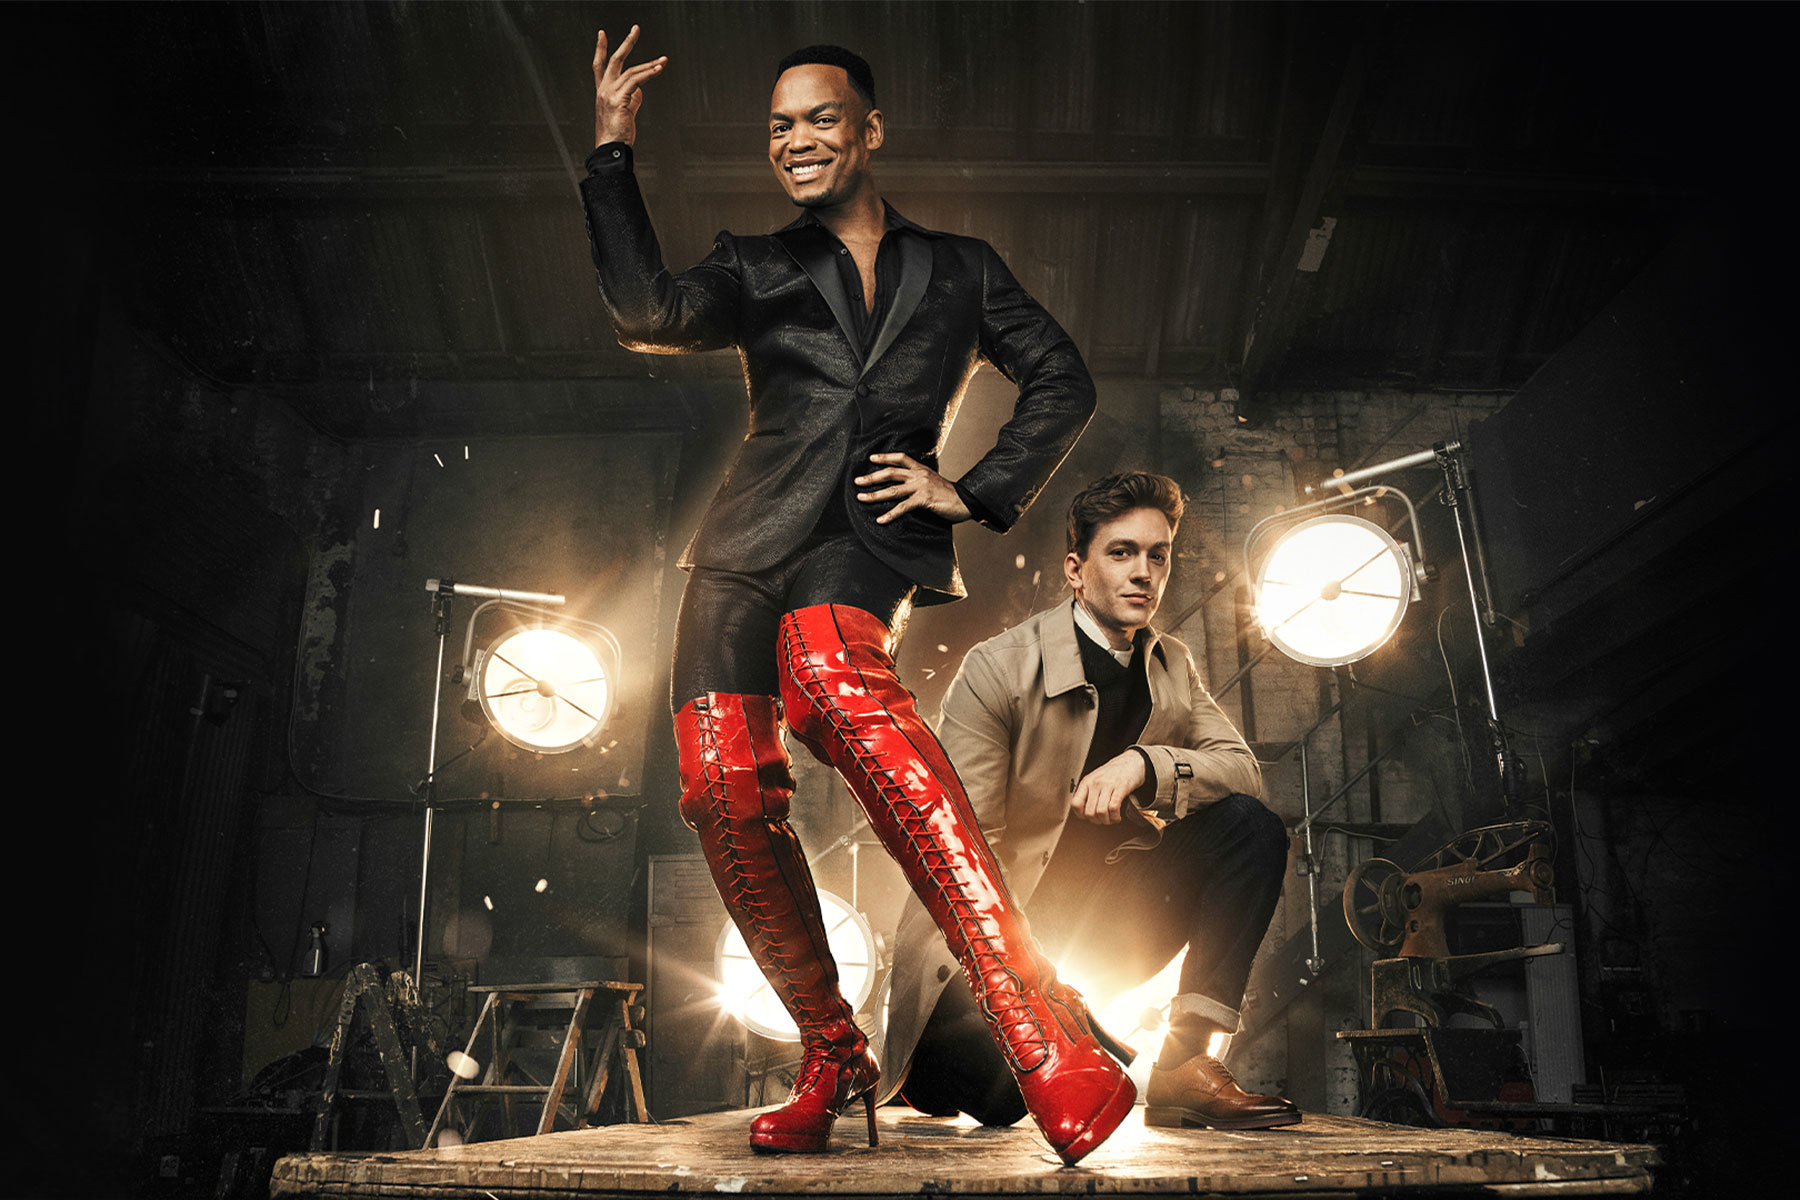 A promotional image for Kinky Boots featuring Johannes Radebe as Lola and Dan Partridge as Charlie Price